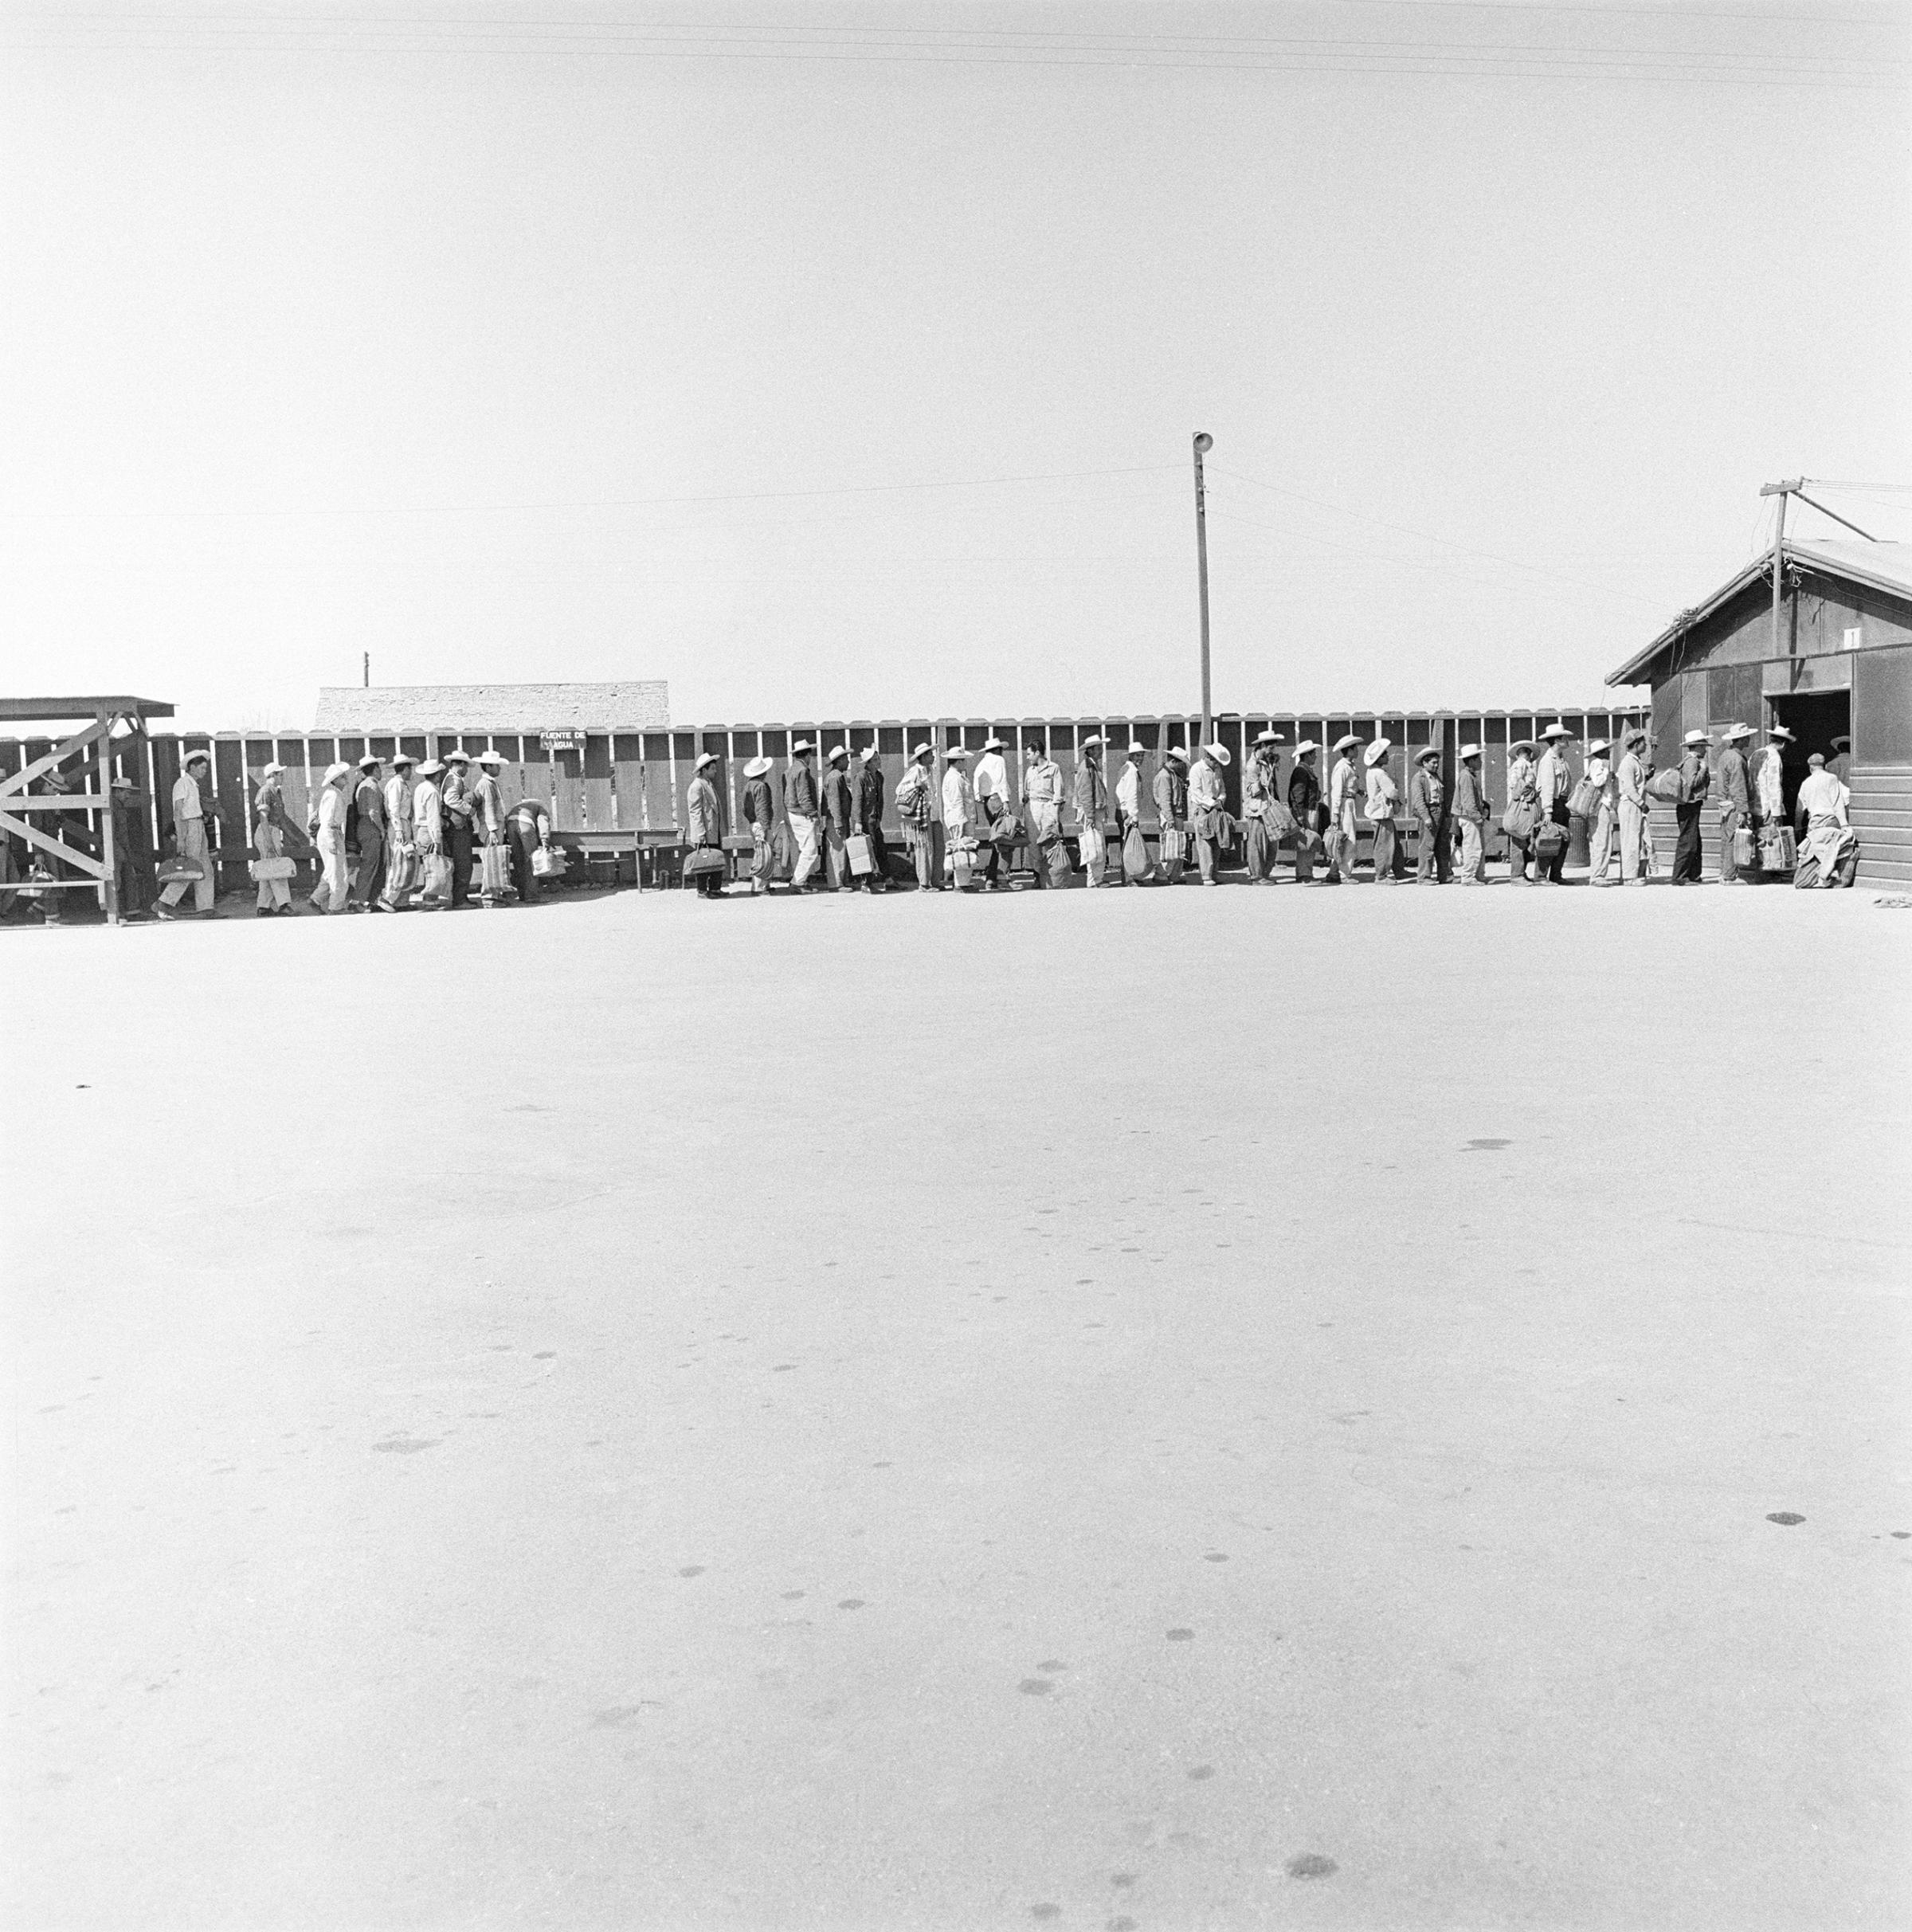 Mexican laborers in line at a reception depot for processing and assignment in California, 1957.